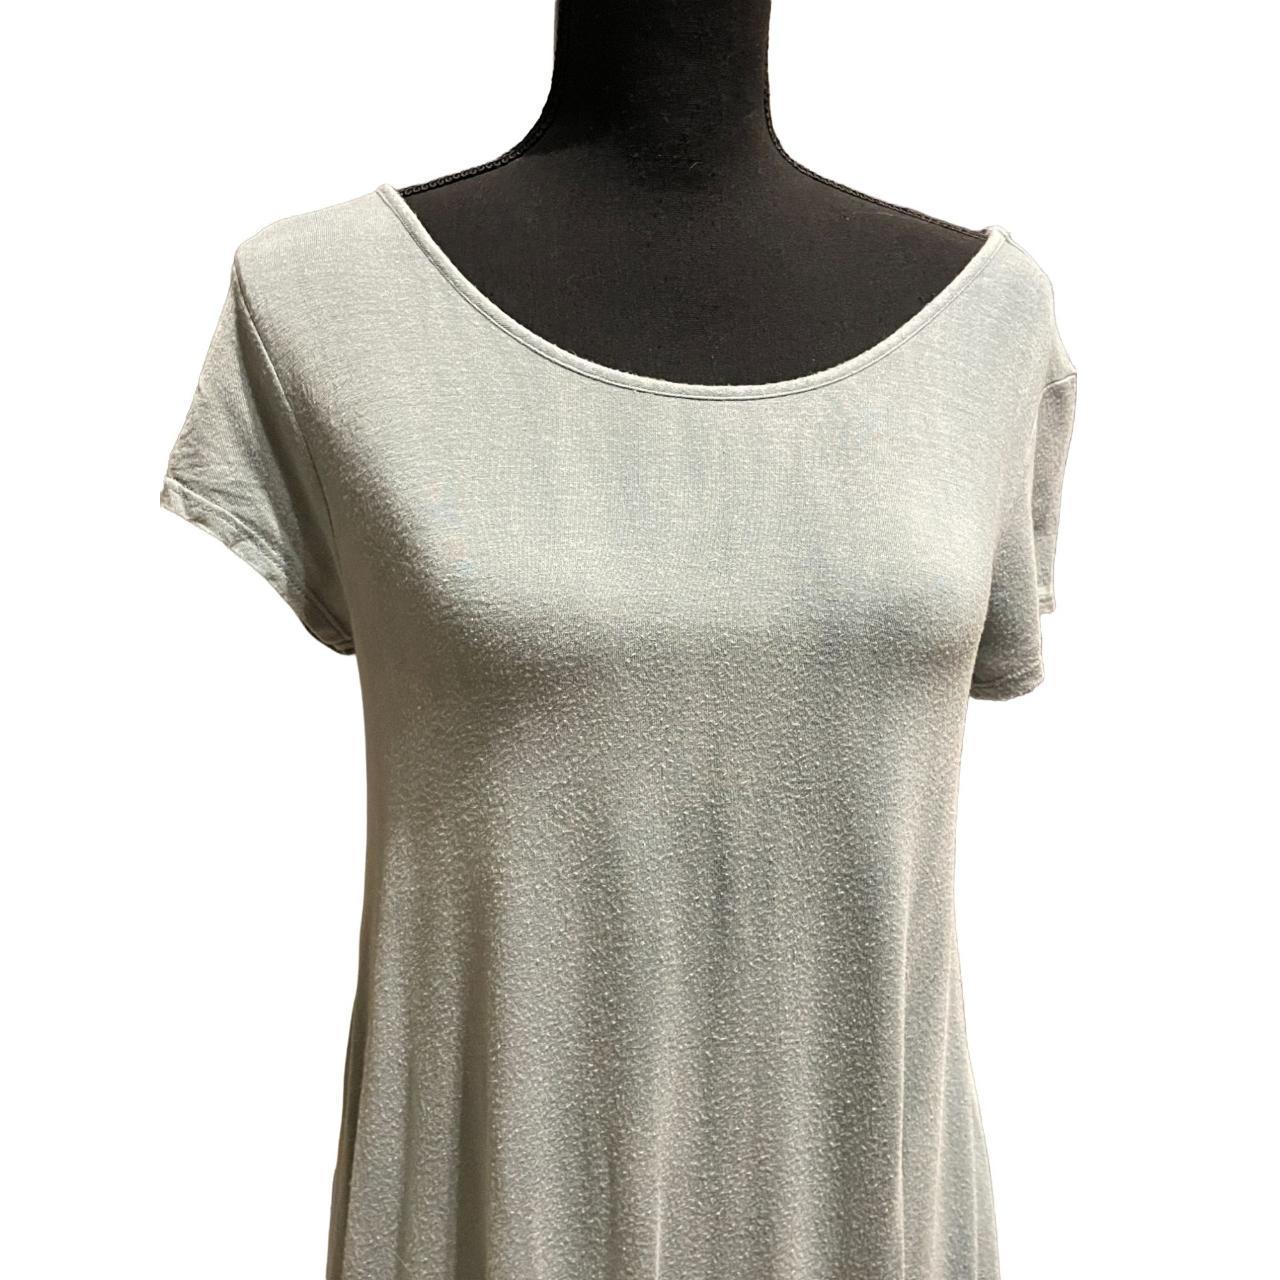 Product Image 2 - Brand: Poof
Style: short sleeve A-line
Size: